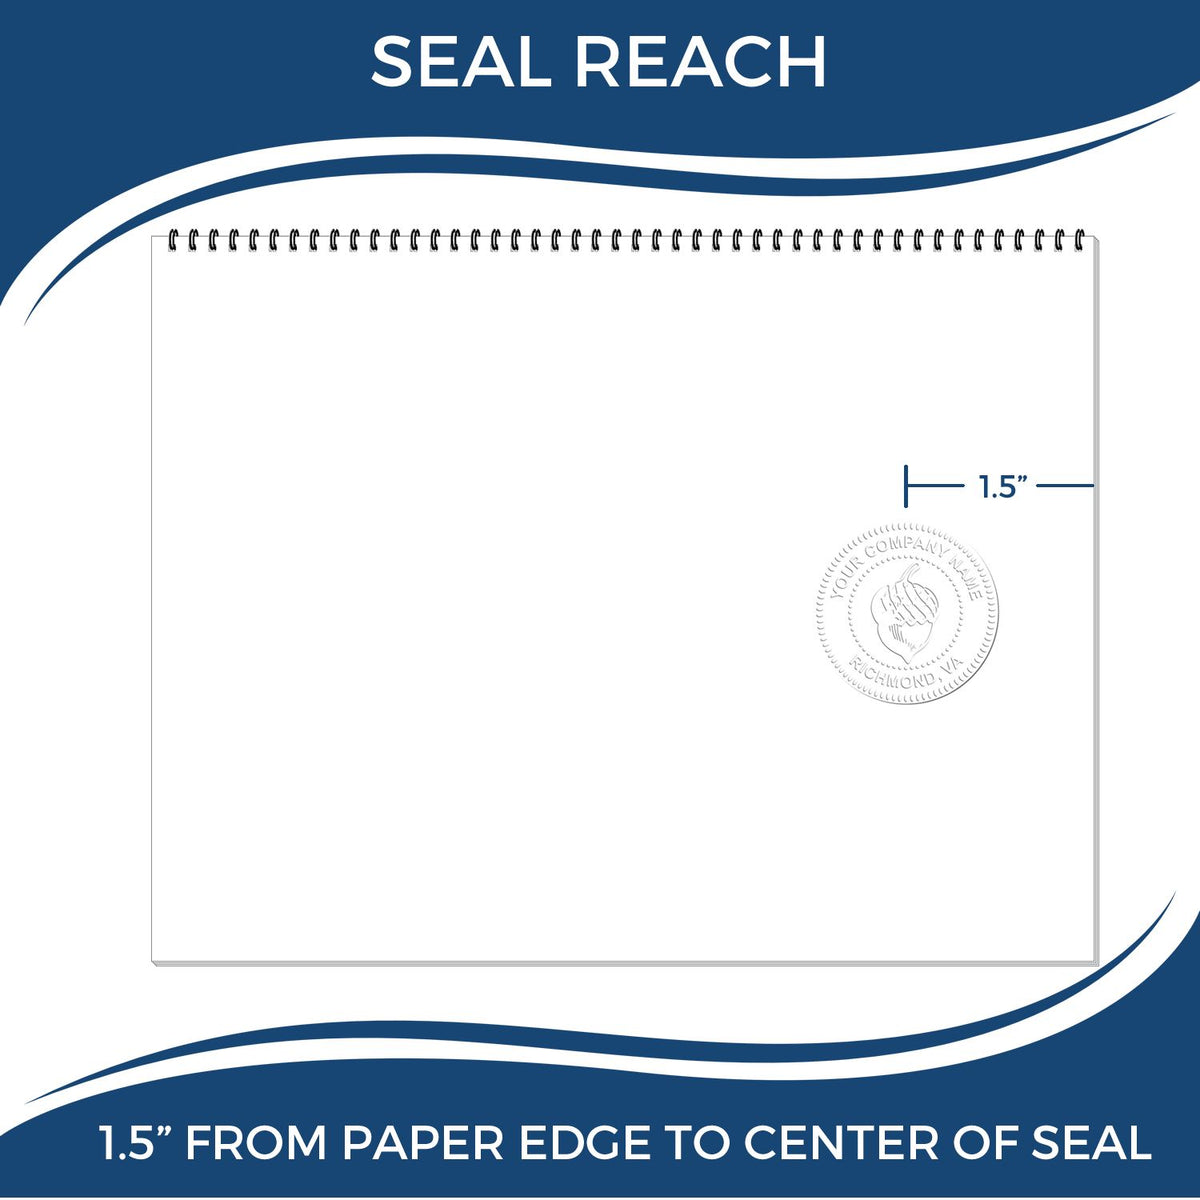 An infographic showing the seal reach which is represented by a ruler and a miniature seal image of the Handheld Louisiana Professional Geologist Embosser